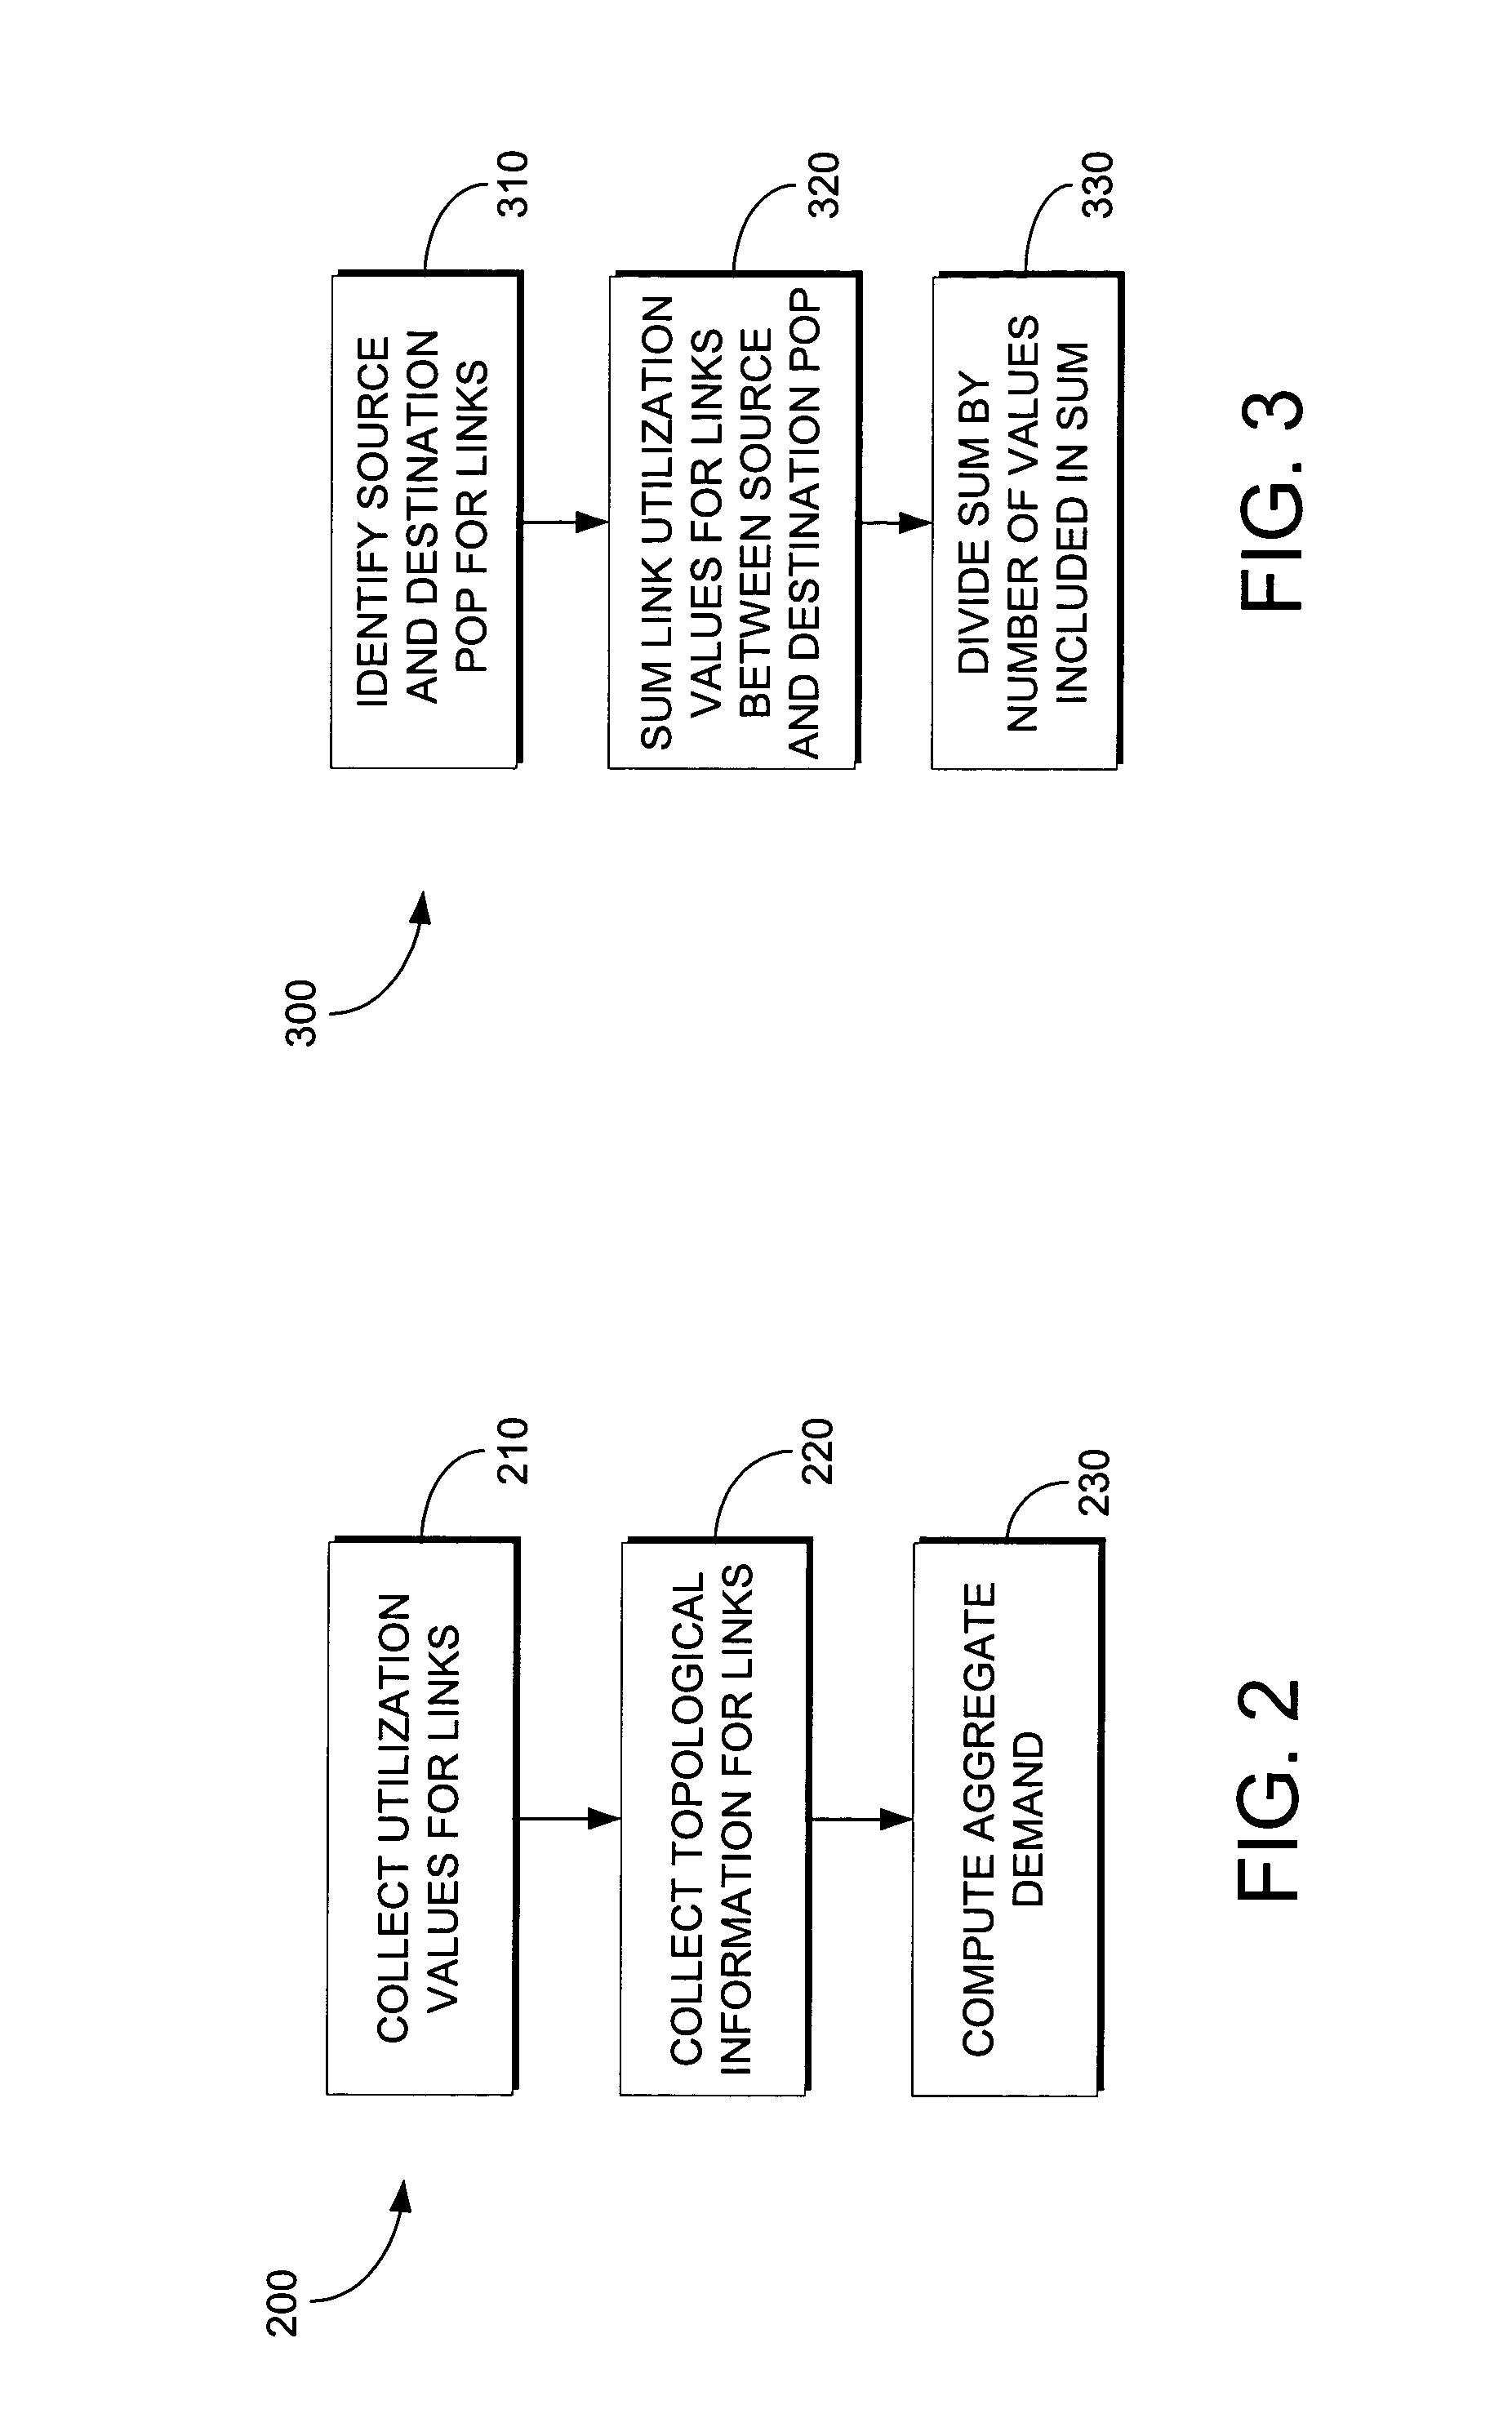 Method for computing aggregate traffic between adjacent points of presence in an internet protocol backbone network